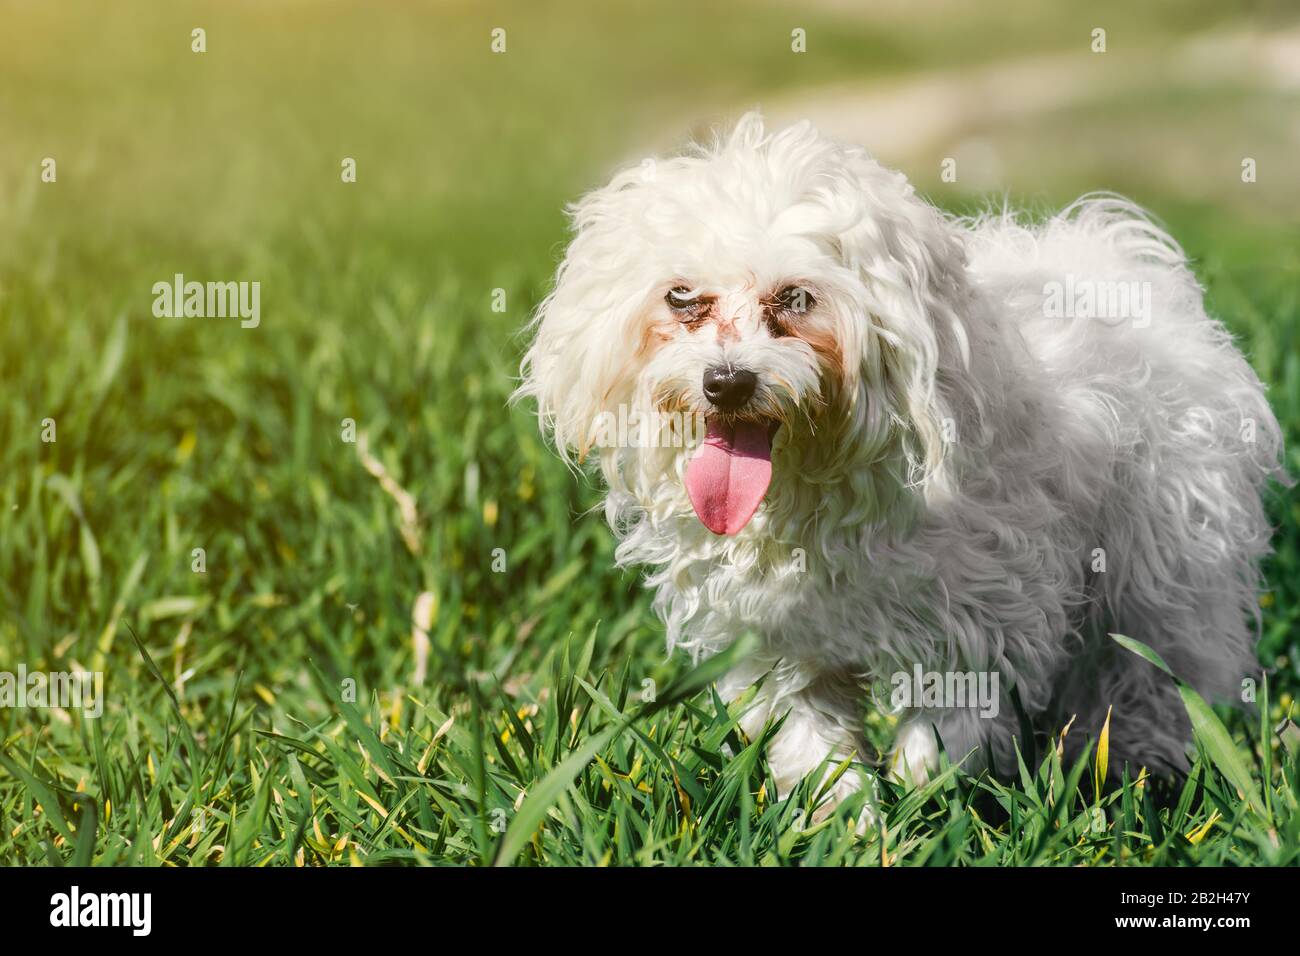 Cute Maltese puppy dog walking on the grass at a sunny day Stock Photo